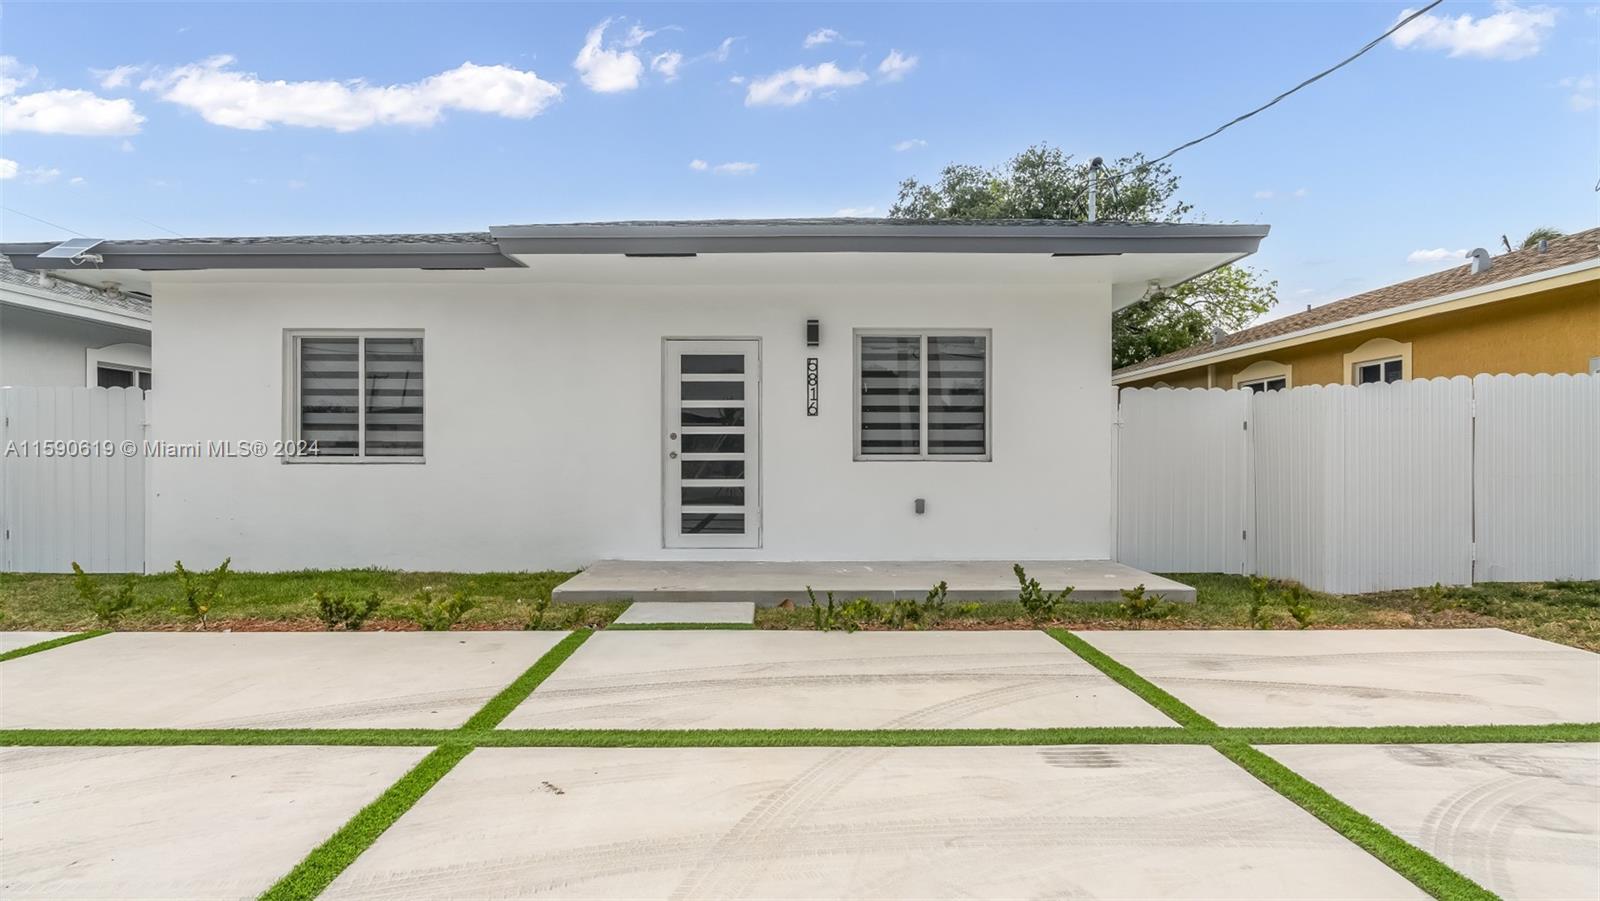 This single-family home located at 5816 NW 23rd Ave in Miami, FL was built in 2024. Boasting 2 bathrooms and an Ac Sq footage of 1,500 square feet, this modern property offers ample space for comfortable living. This home provides plenty space and has Impact windows and doors. This property has one of the biggest driveways in the neighborhood, can fit 4 cars, it is also fully fenced, so the space is private and secure. The home is fitted with 24 x 48 Floor tiles, throughout and also features a waterfall island in the kitchen, Zebra Blackout Shades, and a lazy susan cabinet drawer for convenience. The Seller will give a credit towards home appliances, and closing costs, once a contract is sent.